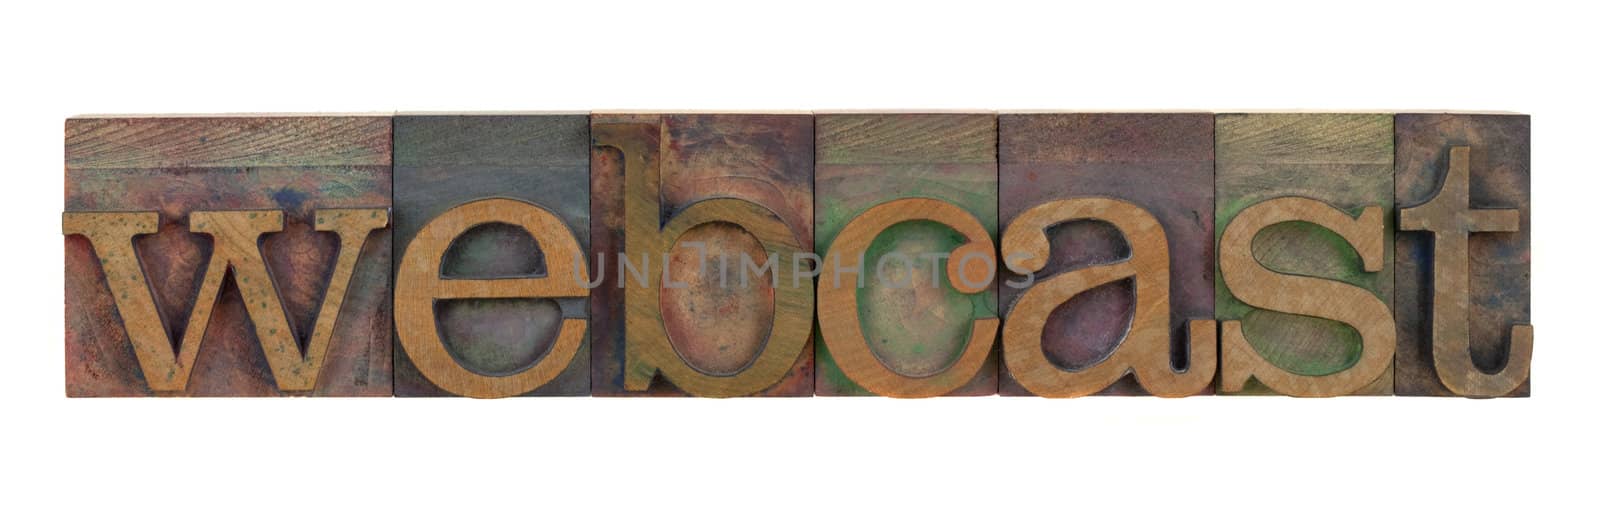 the word webcast in vintage letterpress type blocks, stained by color inks, isolated on white